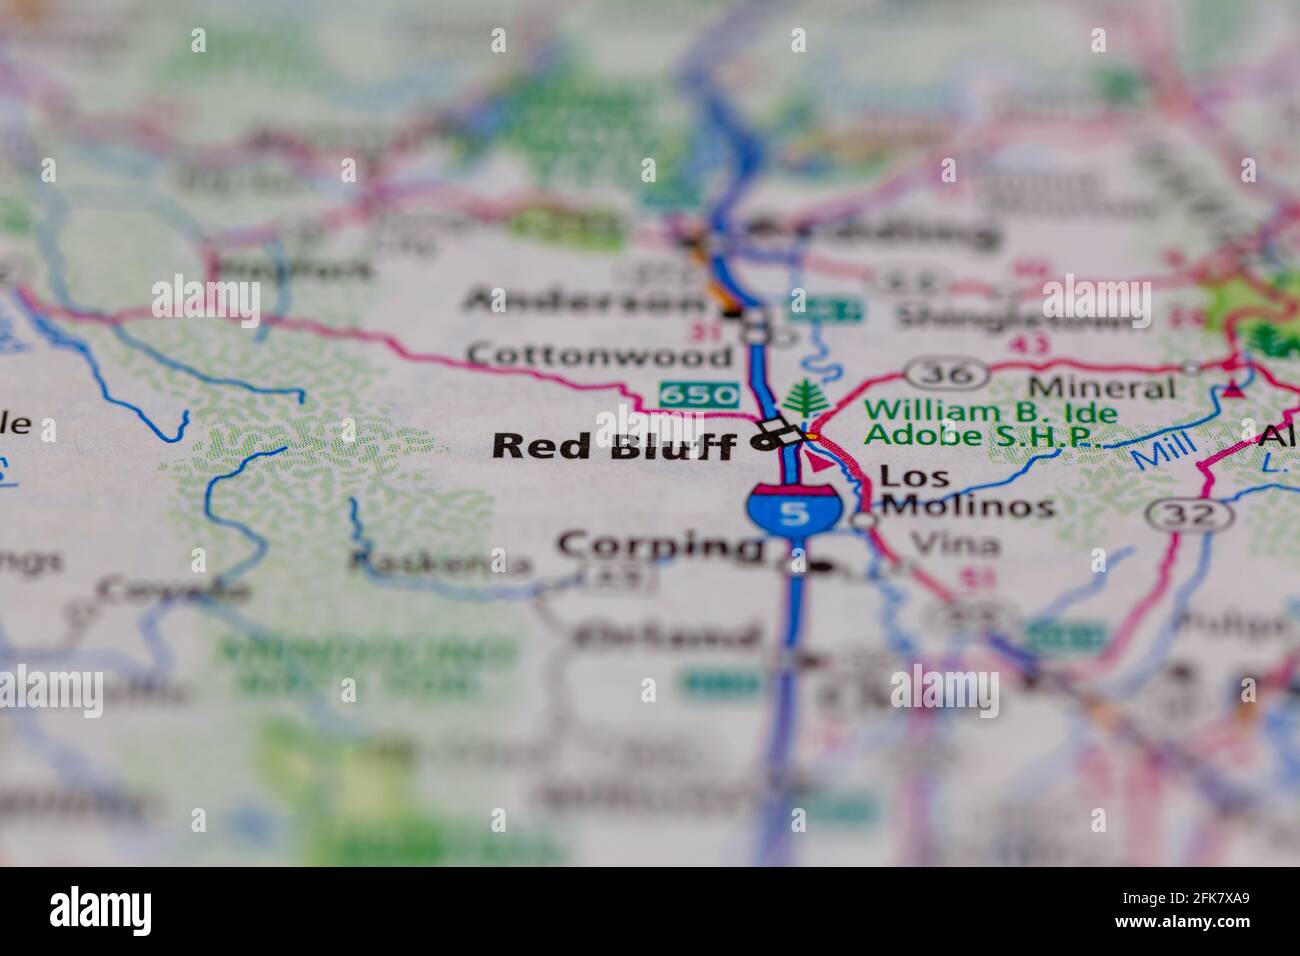 Red Bluff California USA shown on a Geography map or road map Stock Photo